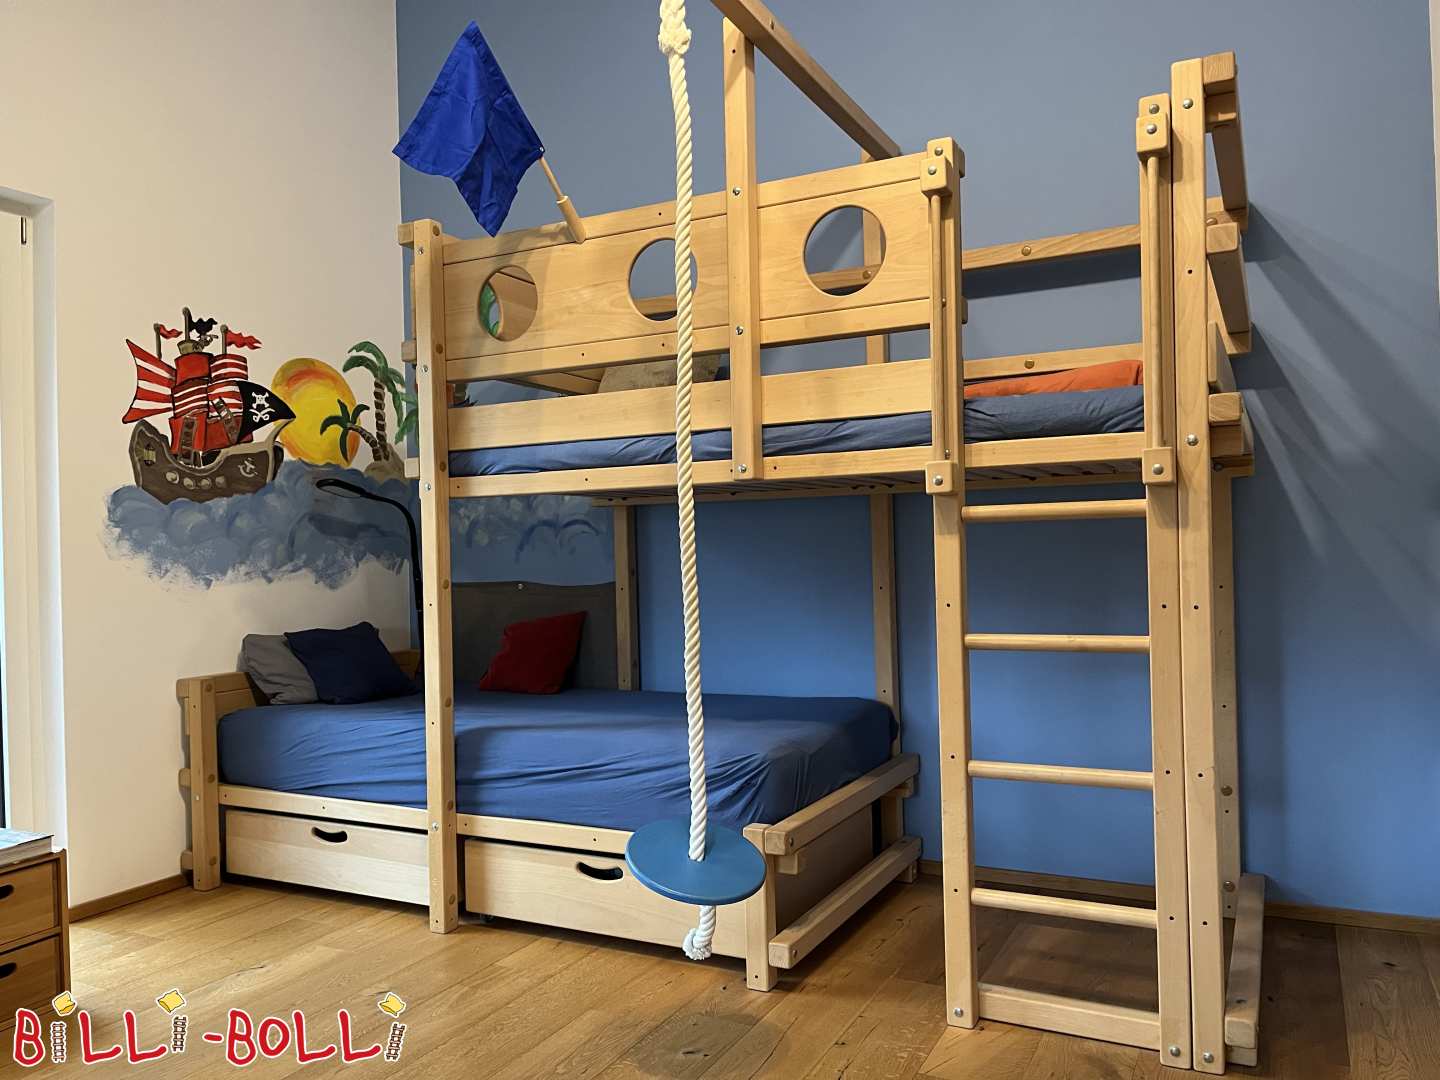 Well-preserved bunk bed-side-offset (PiratenDeko) in Tübingen (Category: Bunk Bed Laterally Staggered pre-owned)